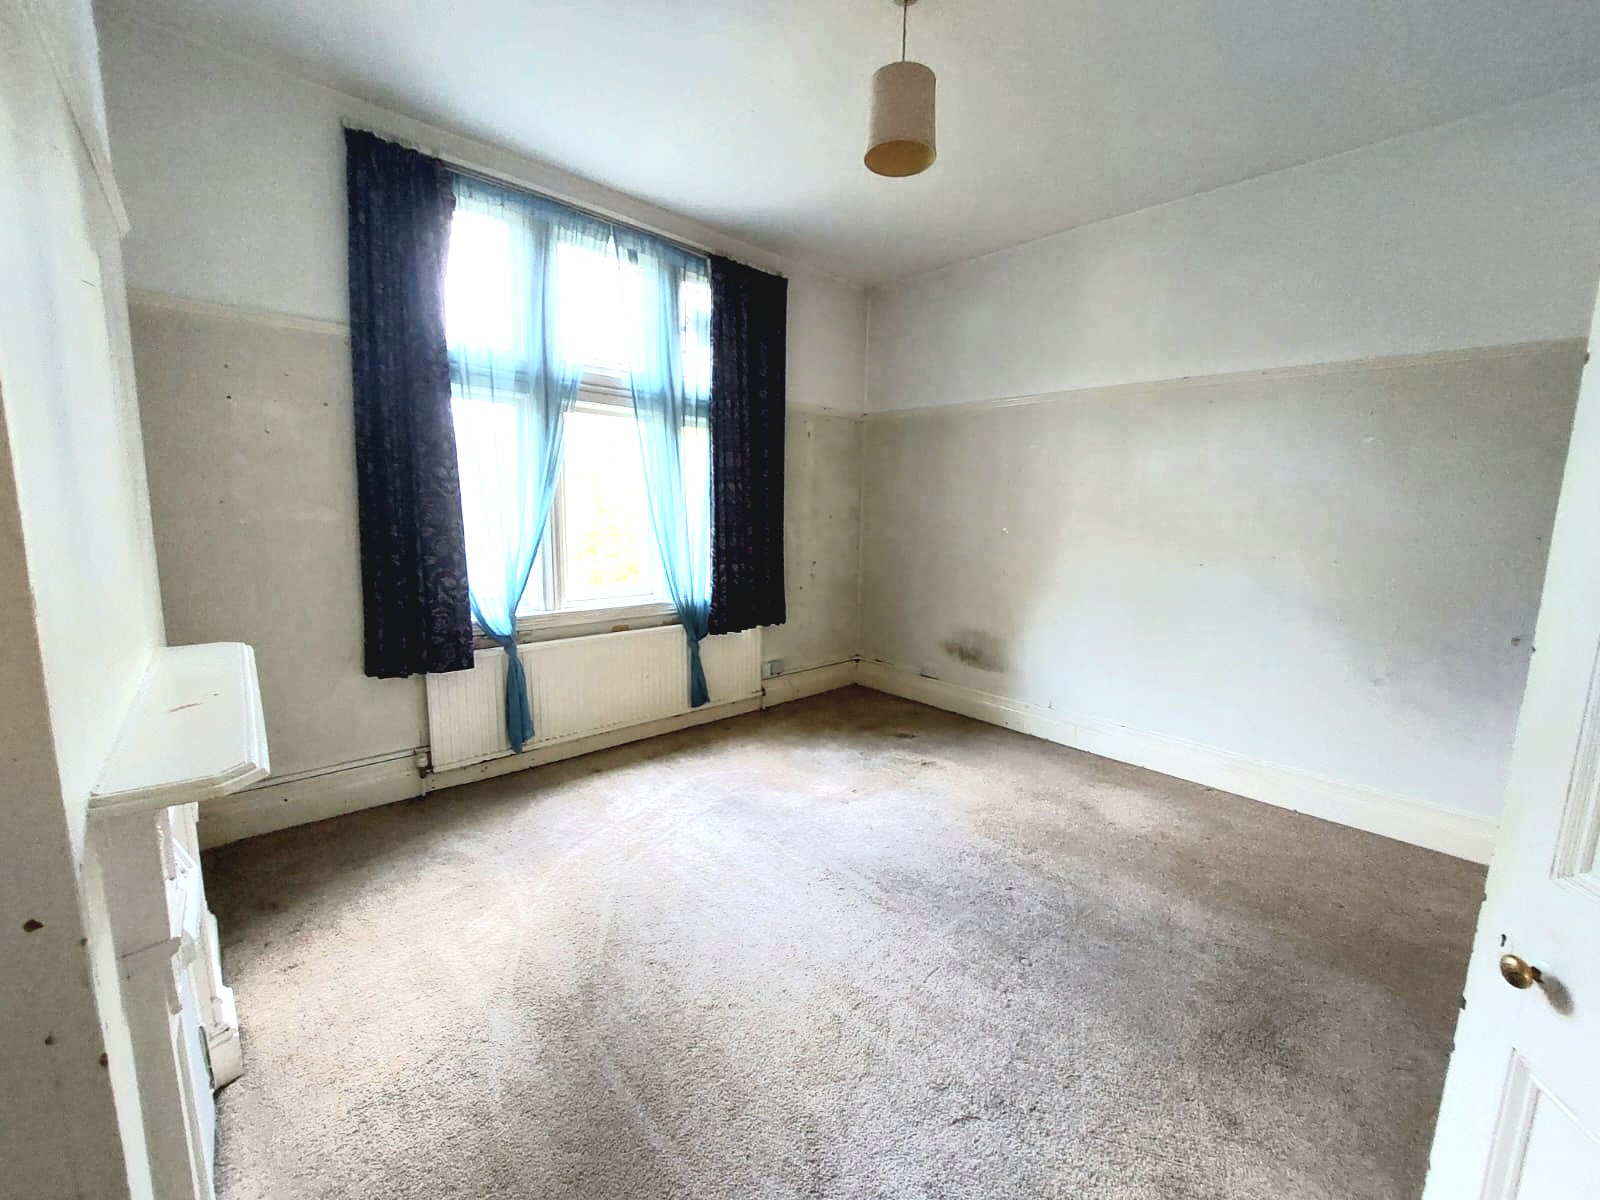 Spacious house share in Perry Barr from £400 inc